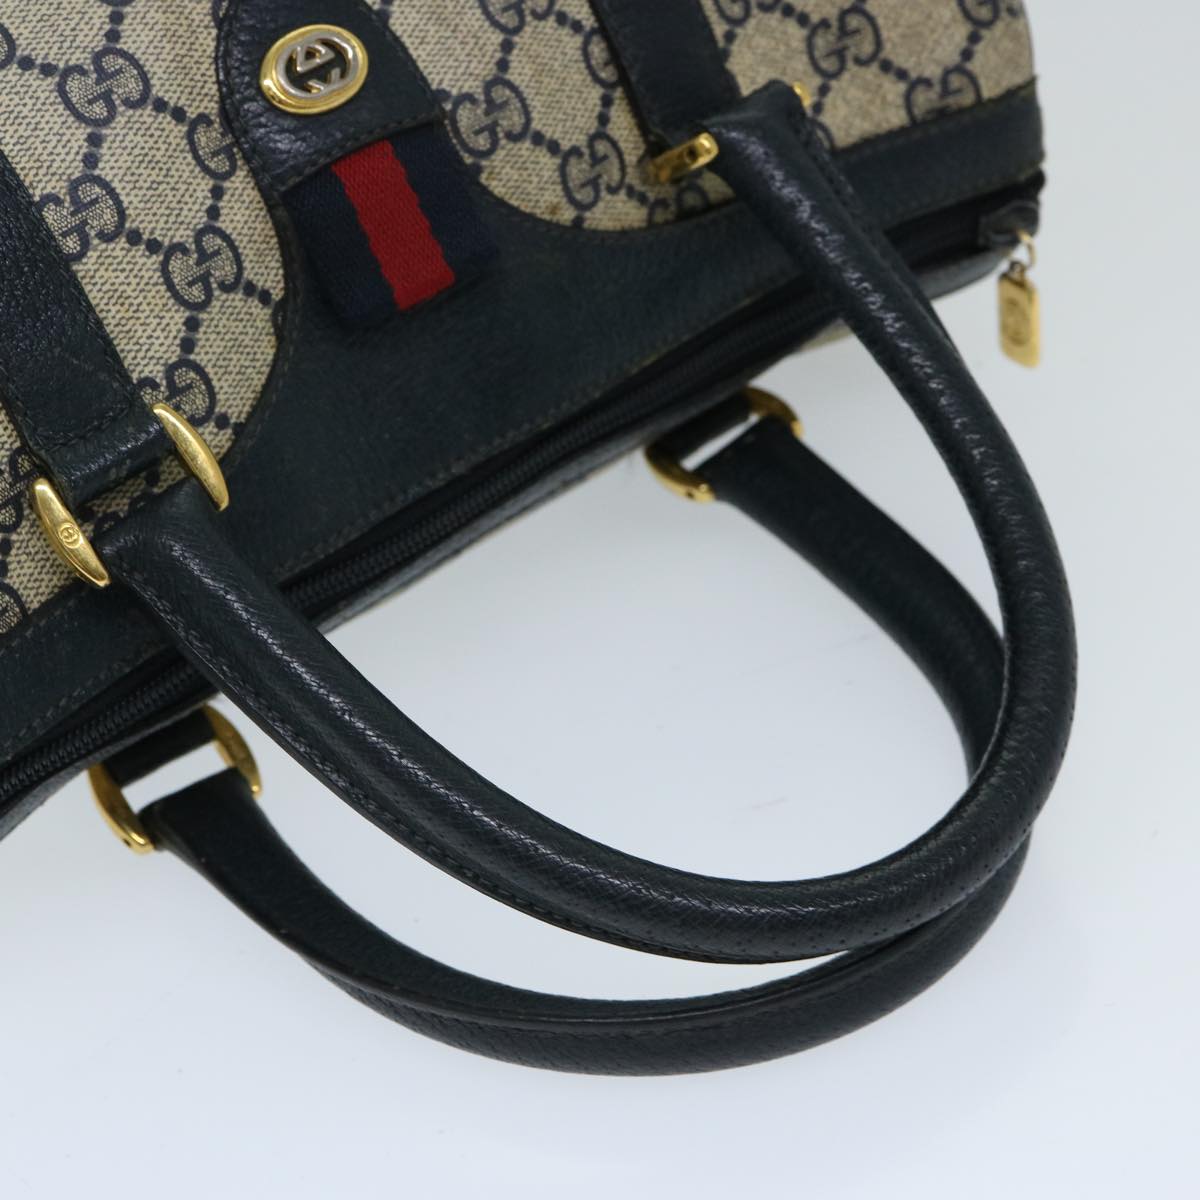 GUCCI GG Supreme Sherry Line Hand Bag PVC Navy Red 40 02 006 Auth 69897